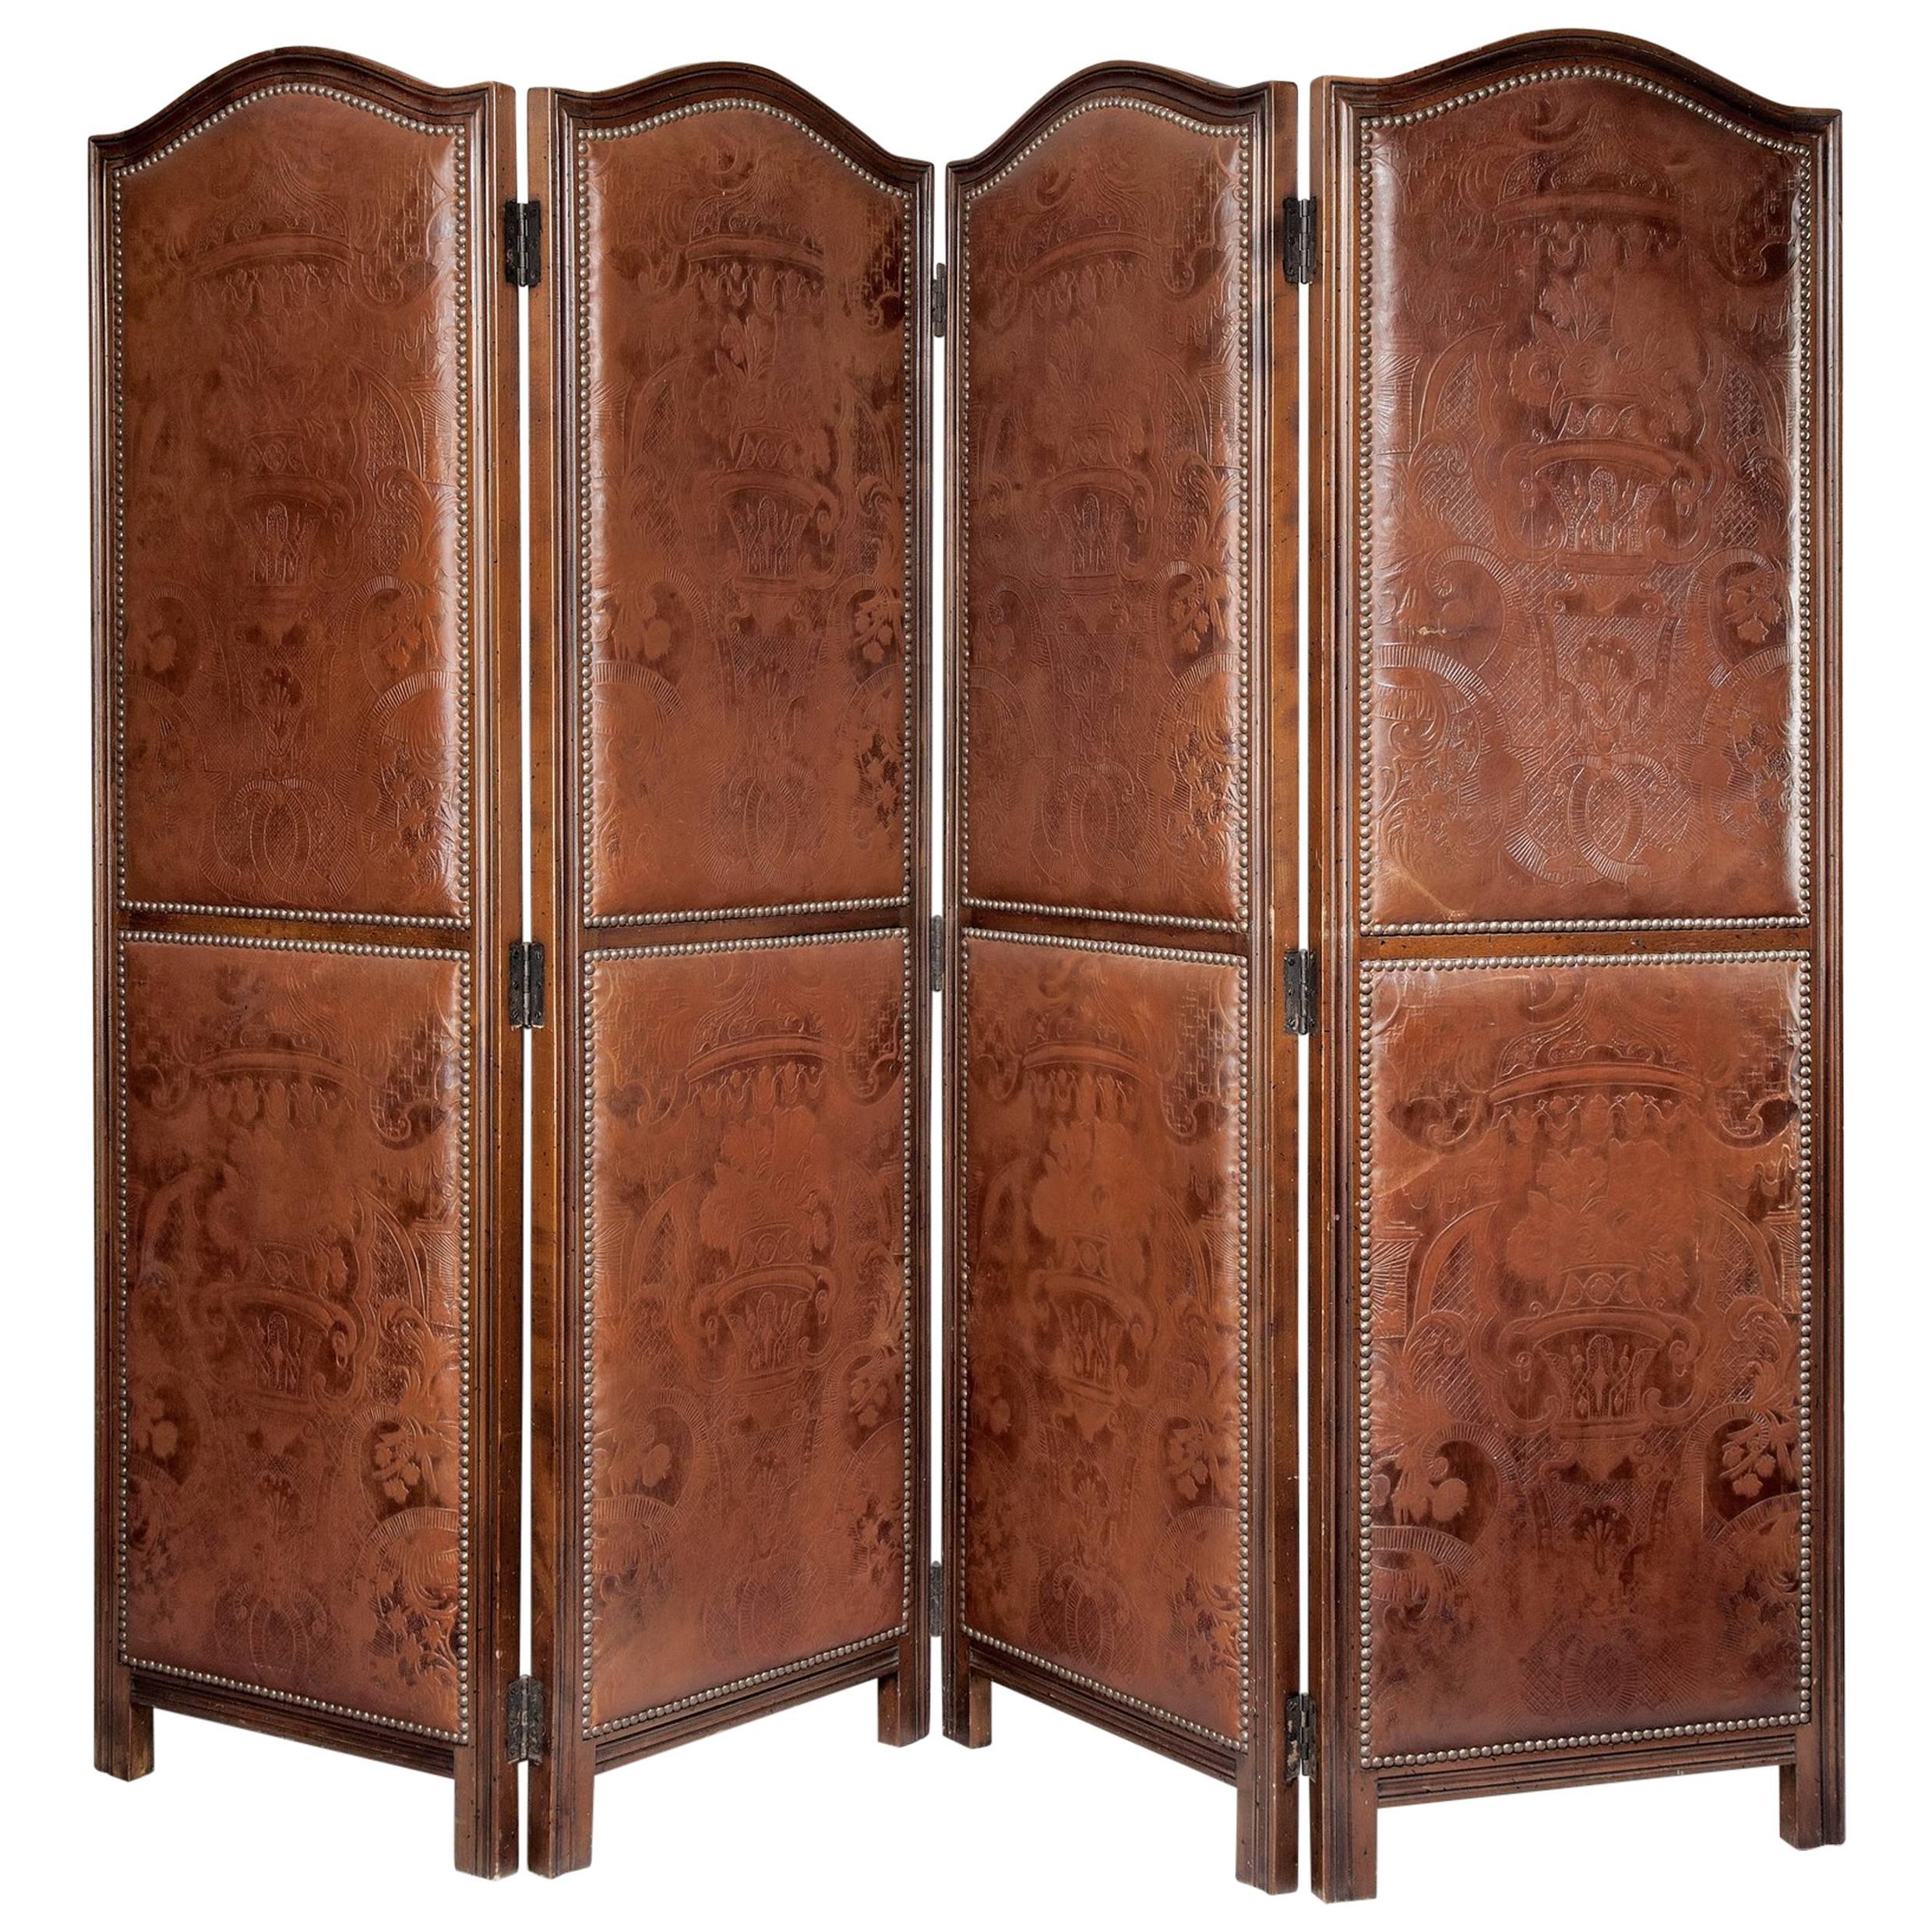 Art Nouveau Period Leather and Mahogany Four Fold Screen For Sale